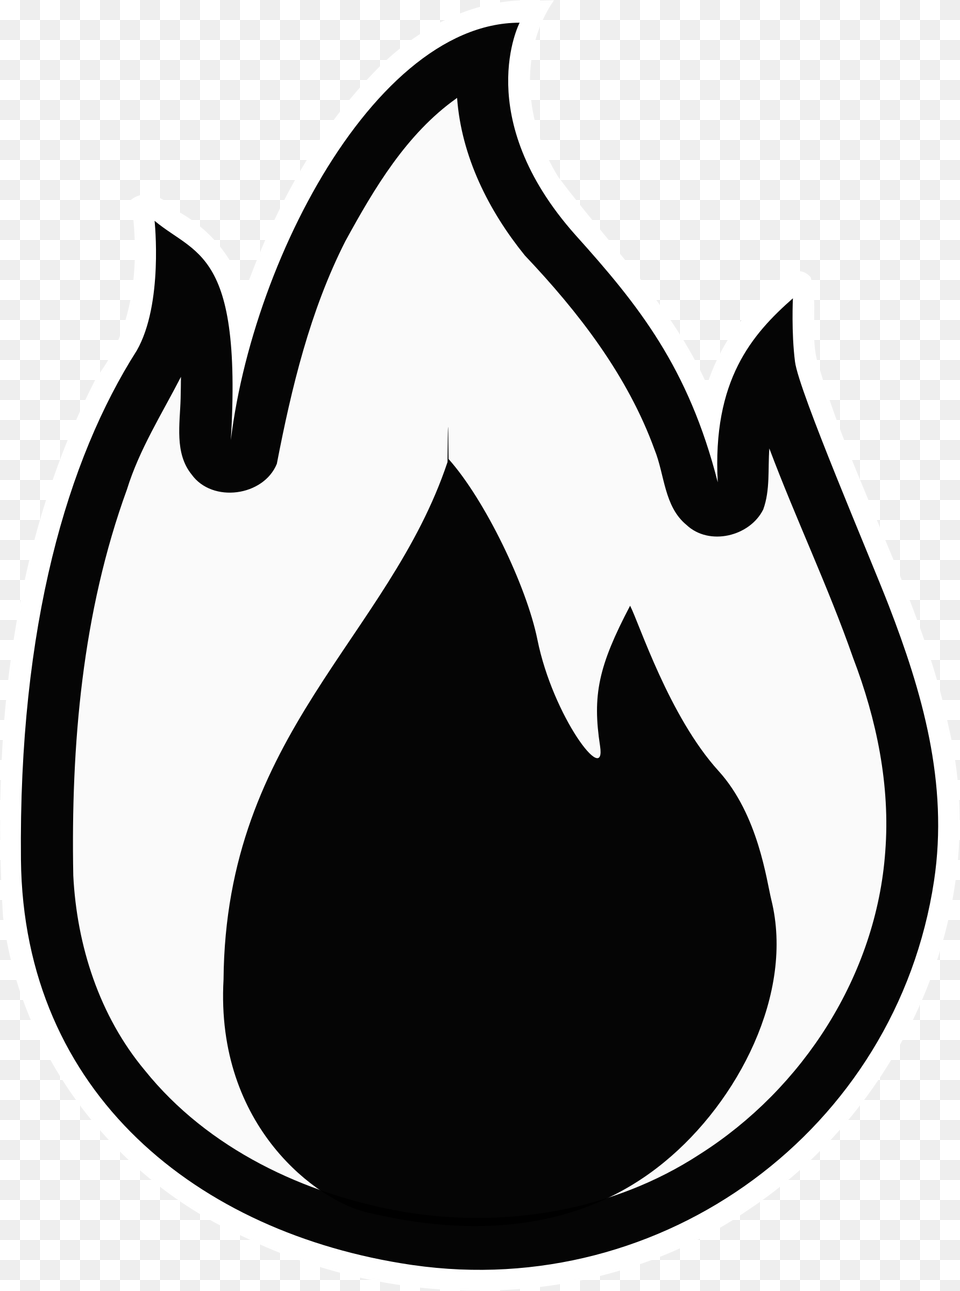 Convert To Base64 Flame Fire Drawing, Stencil, Ammunition, Grenade, Weapon Png